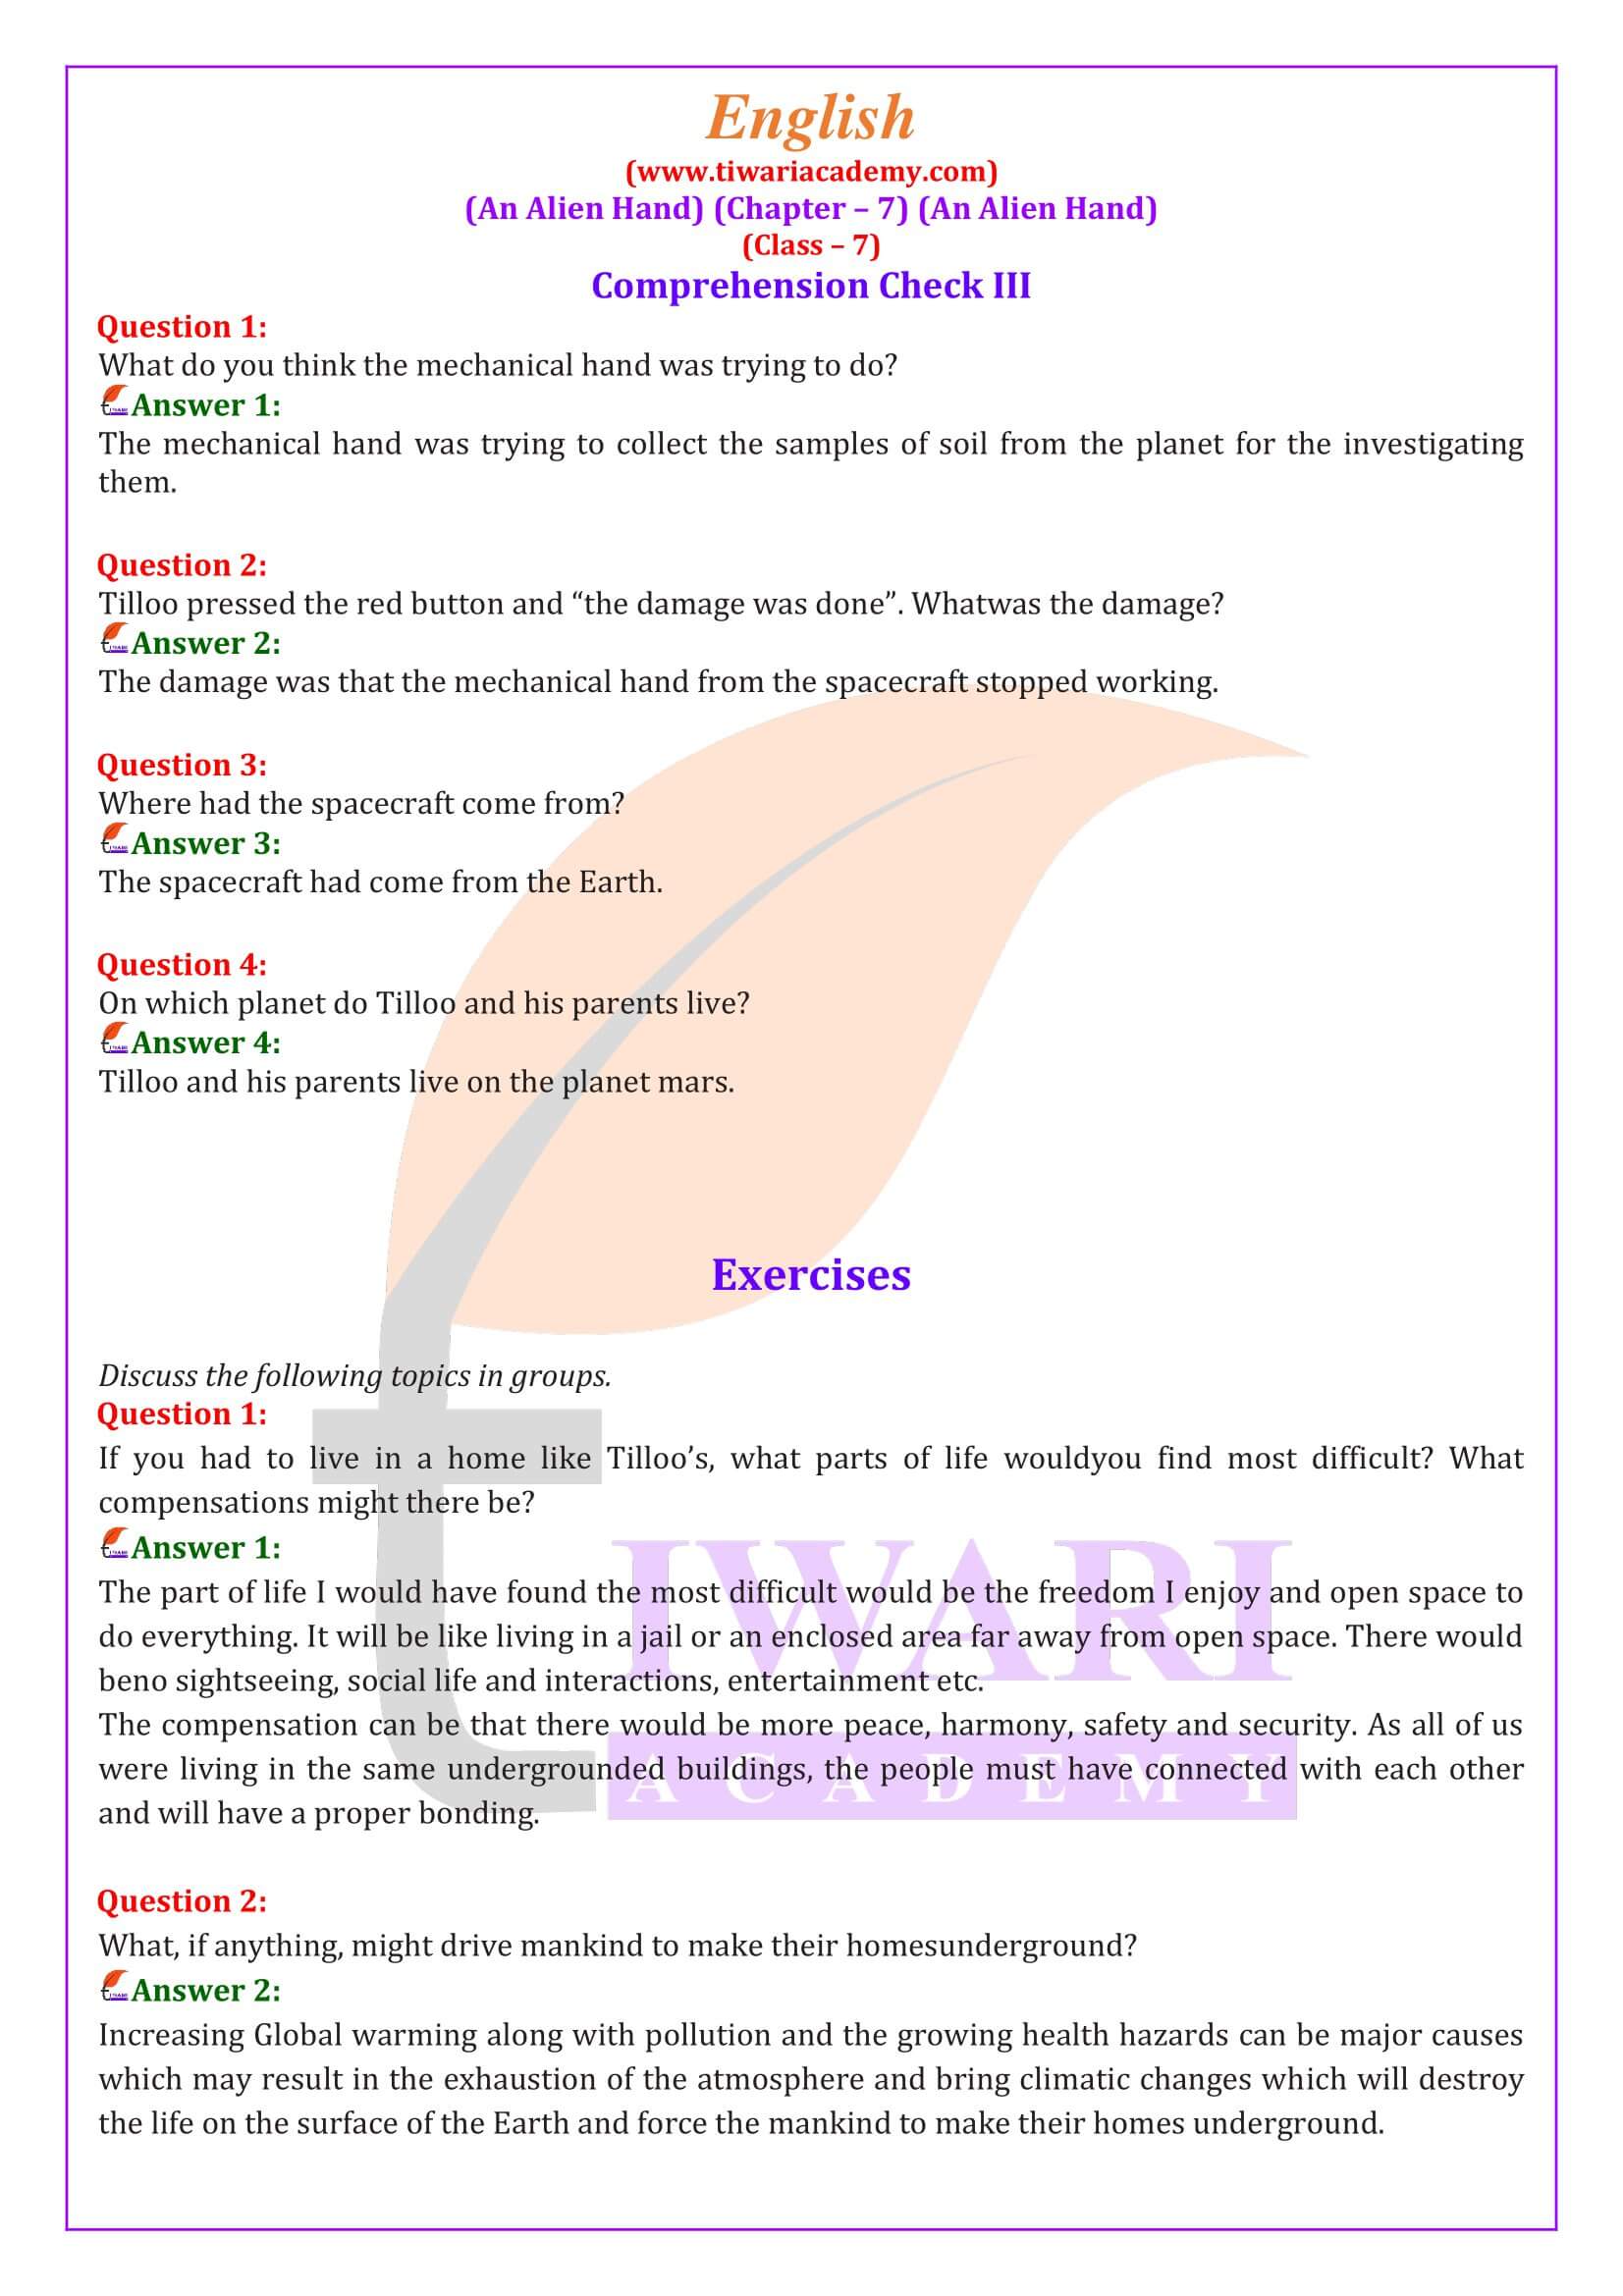 Class 7 English an Alien Hand Chapter 7 Question Answers